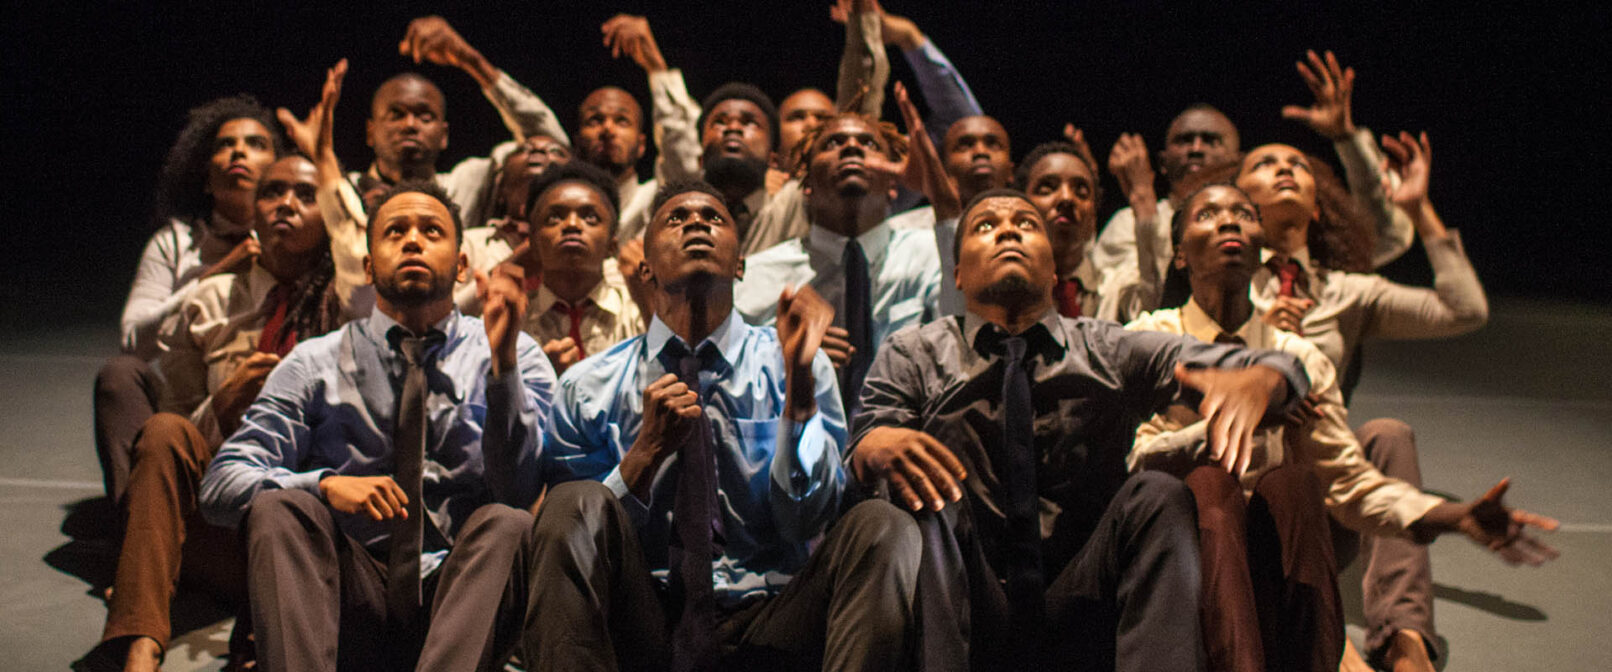 Sankofa Danzafro. A group of seventeen Black dancers of mixed genders sit together on the floor facing forward, looking up in the air. Some have arms reaching upwards. They are all dressed in button up tops with ties and slacks.